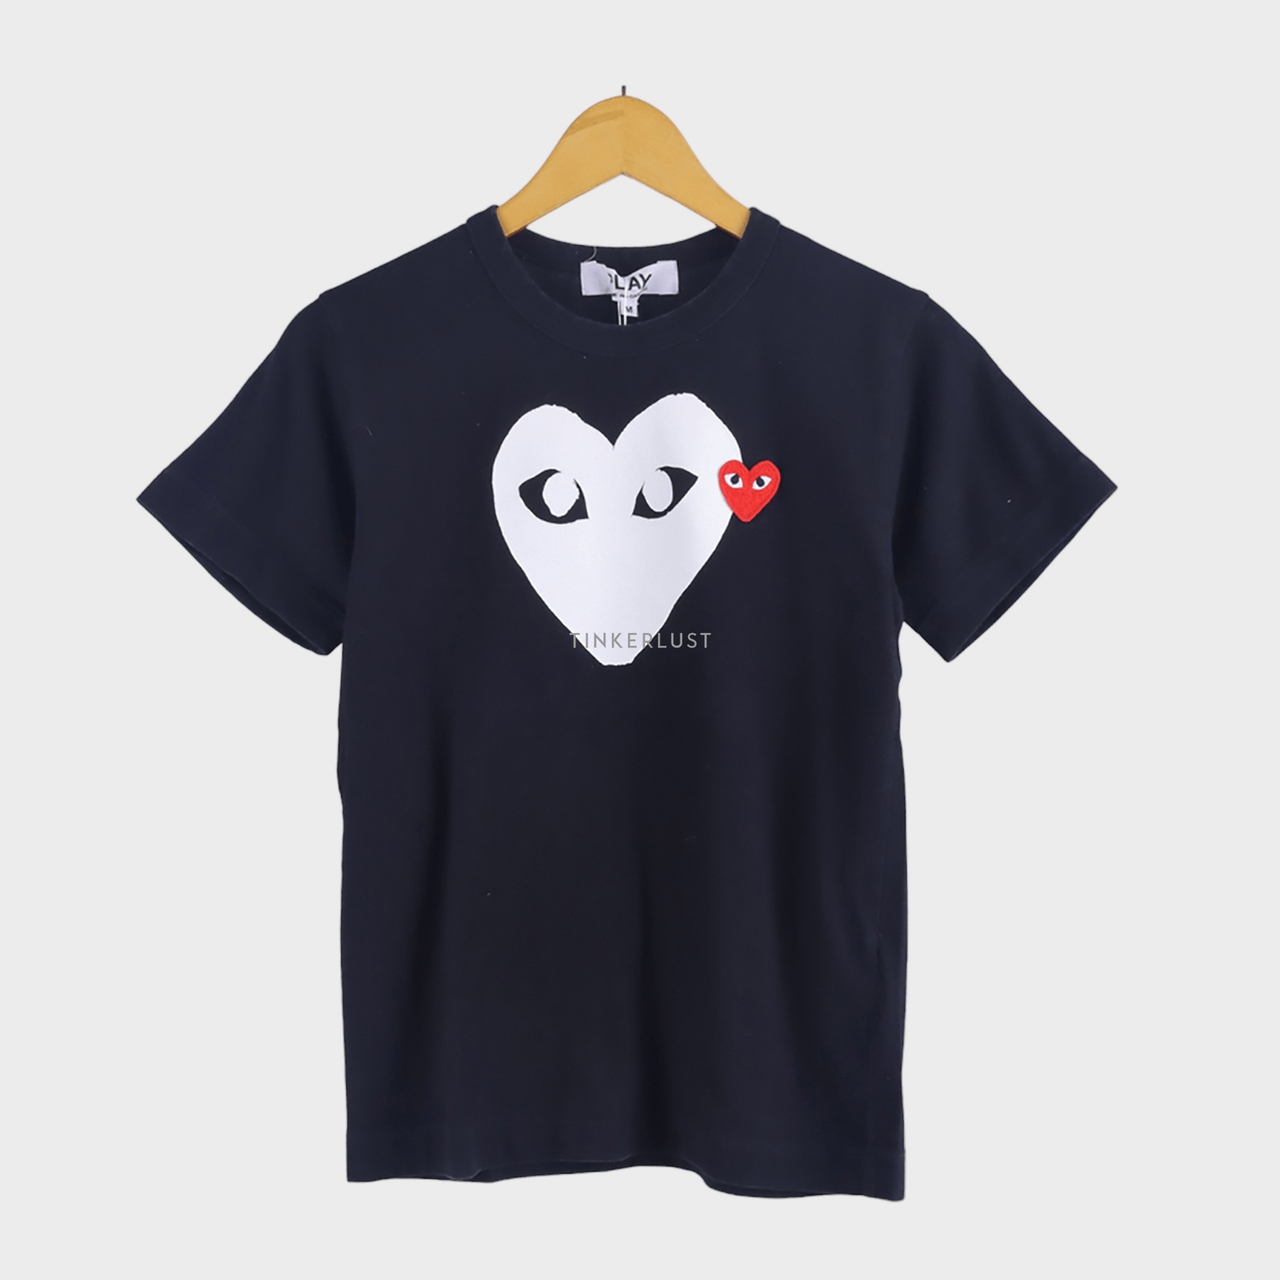 Play by Comme des Garcons Black Heart Print T-Shirt